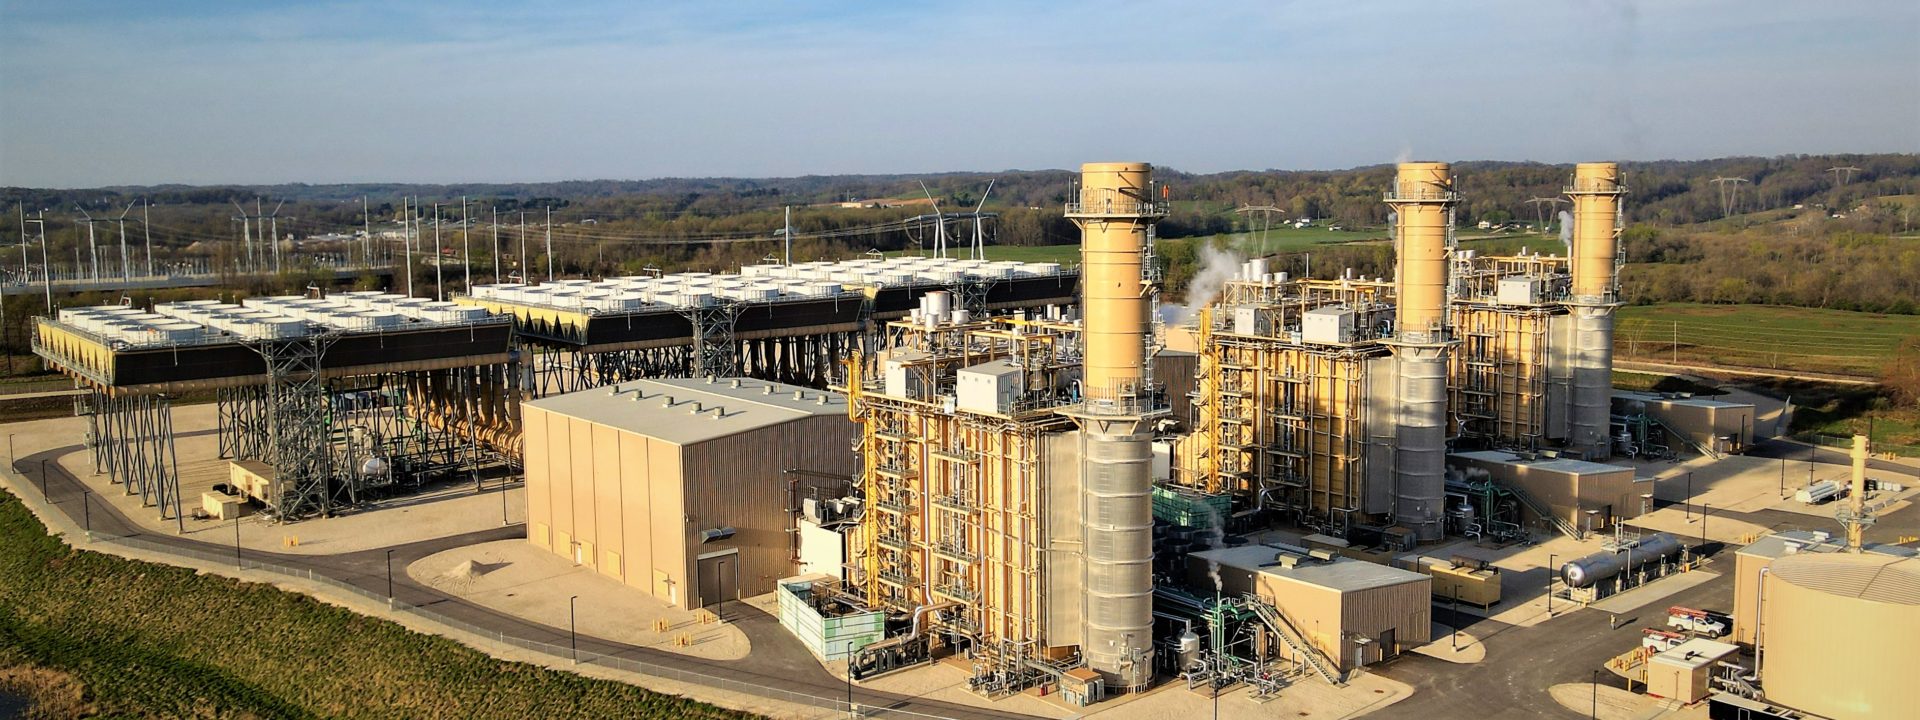 GE-Powered Combined Cycle Plant Now Providing 1.8 GW of Electricity in Ohio